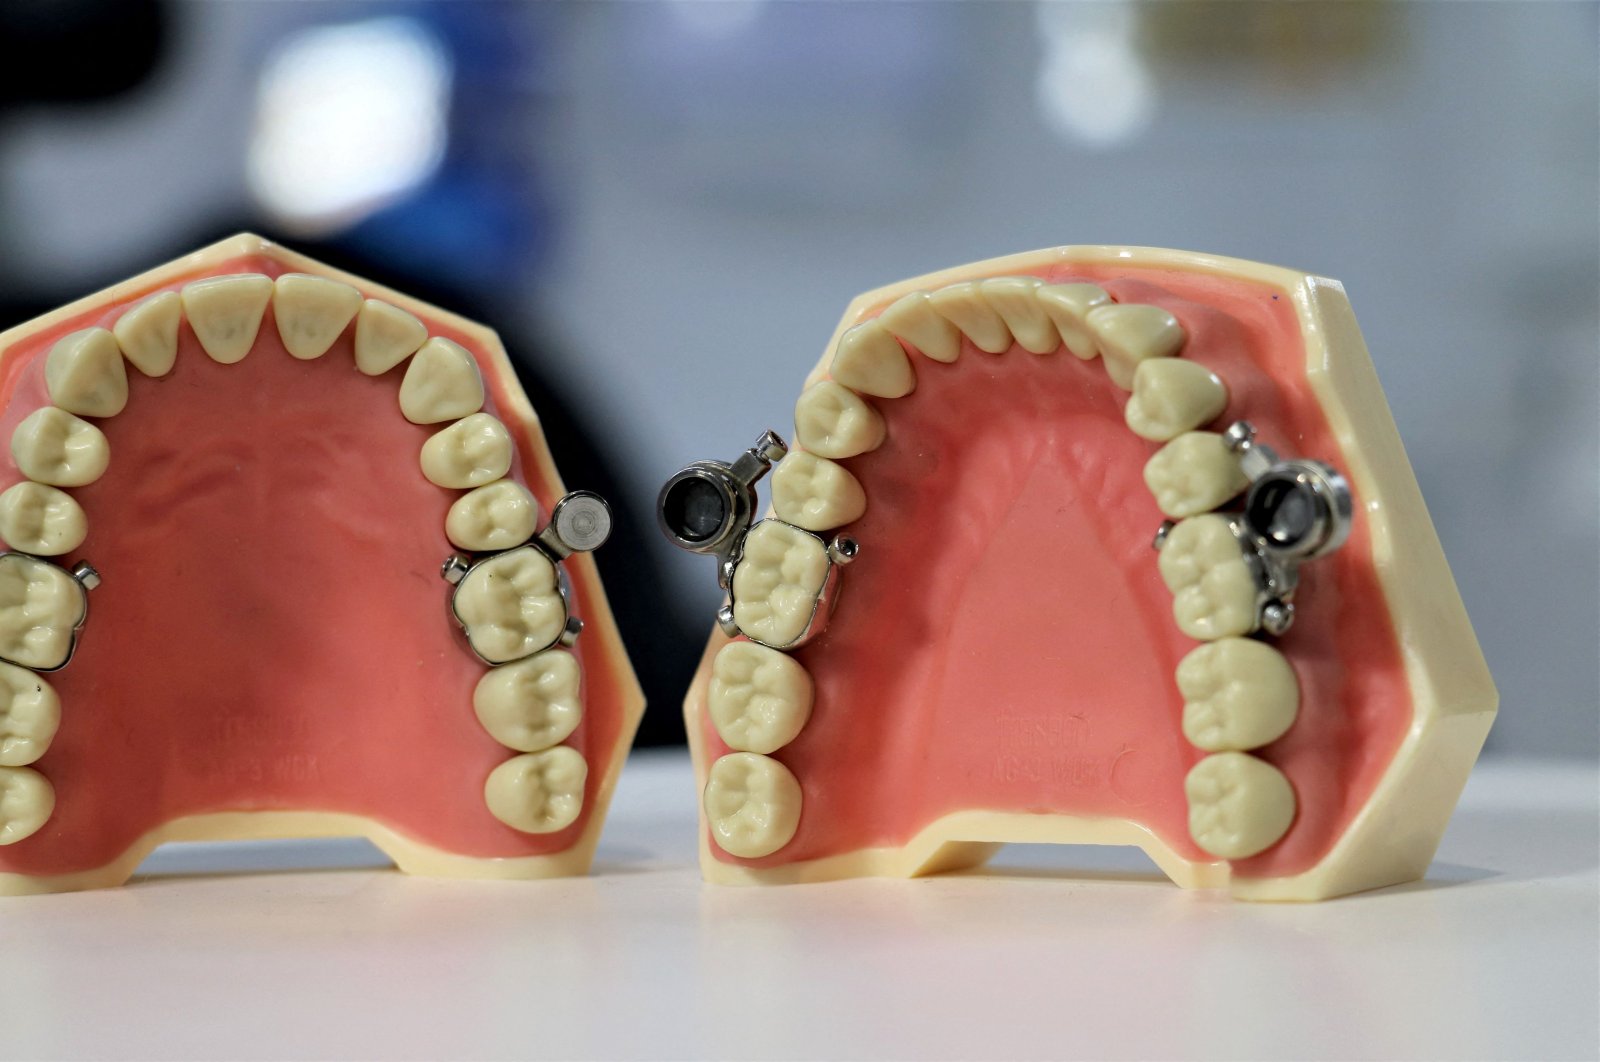 A weight-loss device created by New Zealand researchers that use magnets to clamp a patient's jaw together which critics liken to an instrument of medieval torture, Dunedin, New Zealand, June 29, 2020. (University of Otago via AFP)